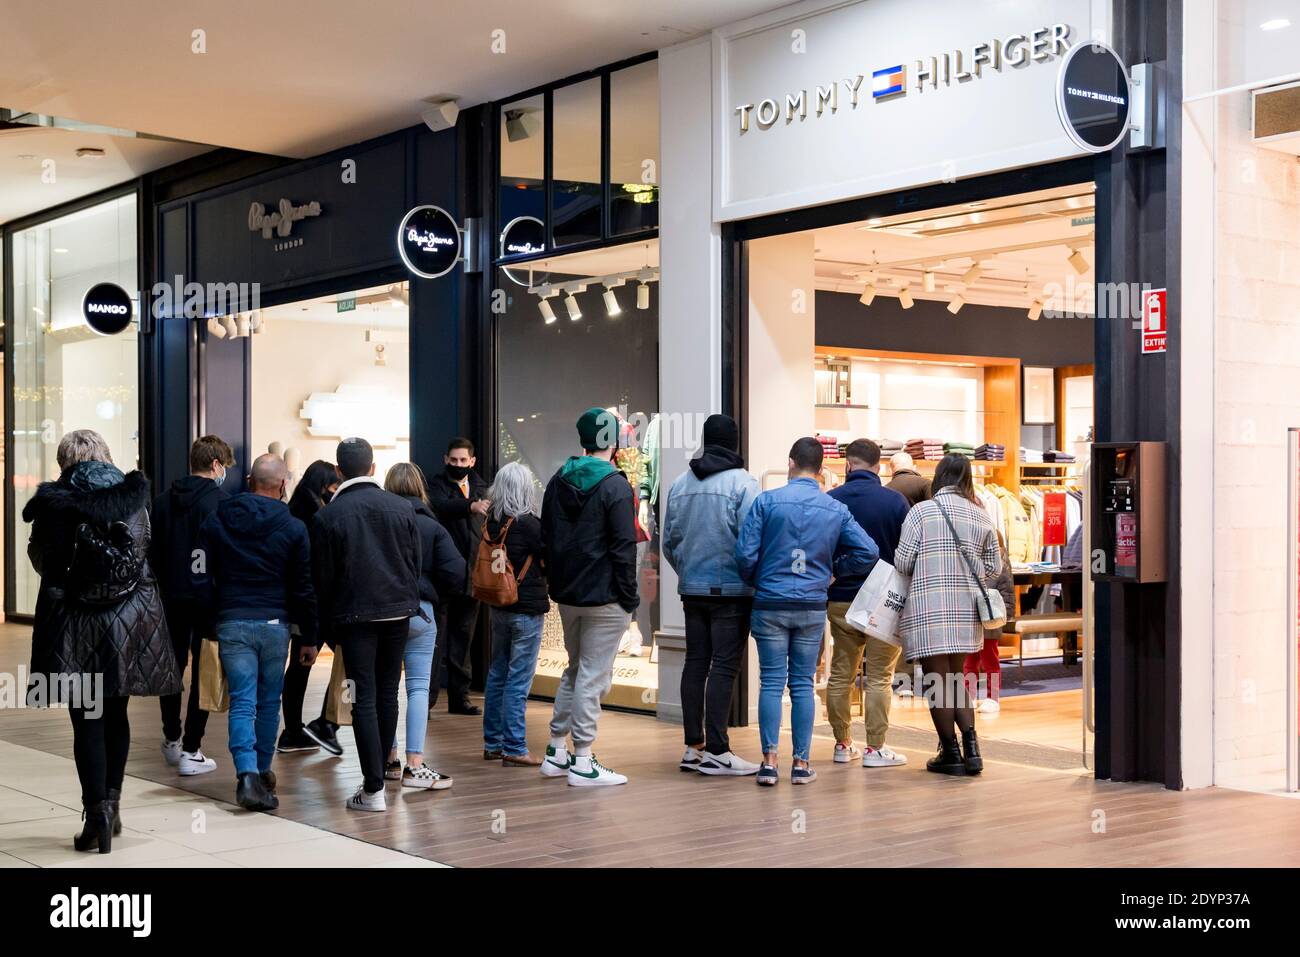 Tommy hilfiger store hi-res stock photography and images - Page 3 - Alamy